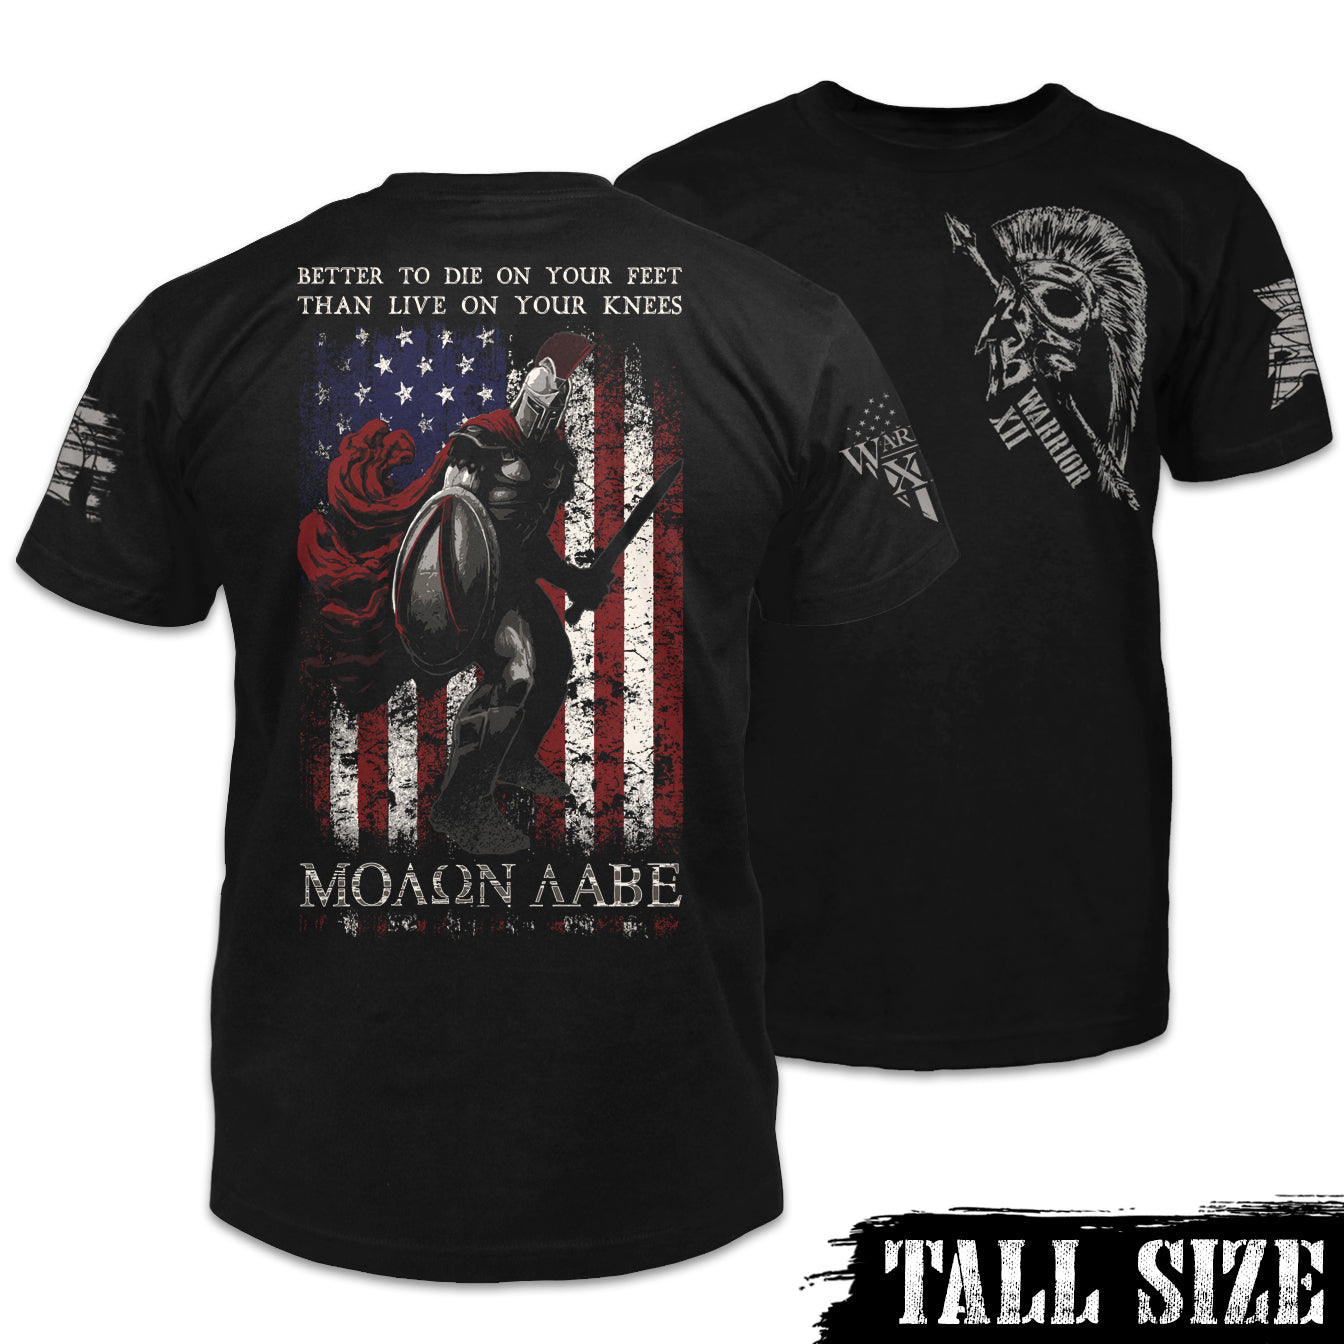 Front and back black tall size shirt with the words "Better To Die On Your Feet Than Live On Your Knees, "MOLON LABE" with a spartan in front of the USA flag printed on the shirt.